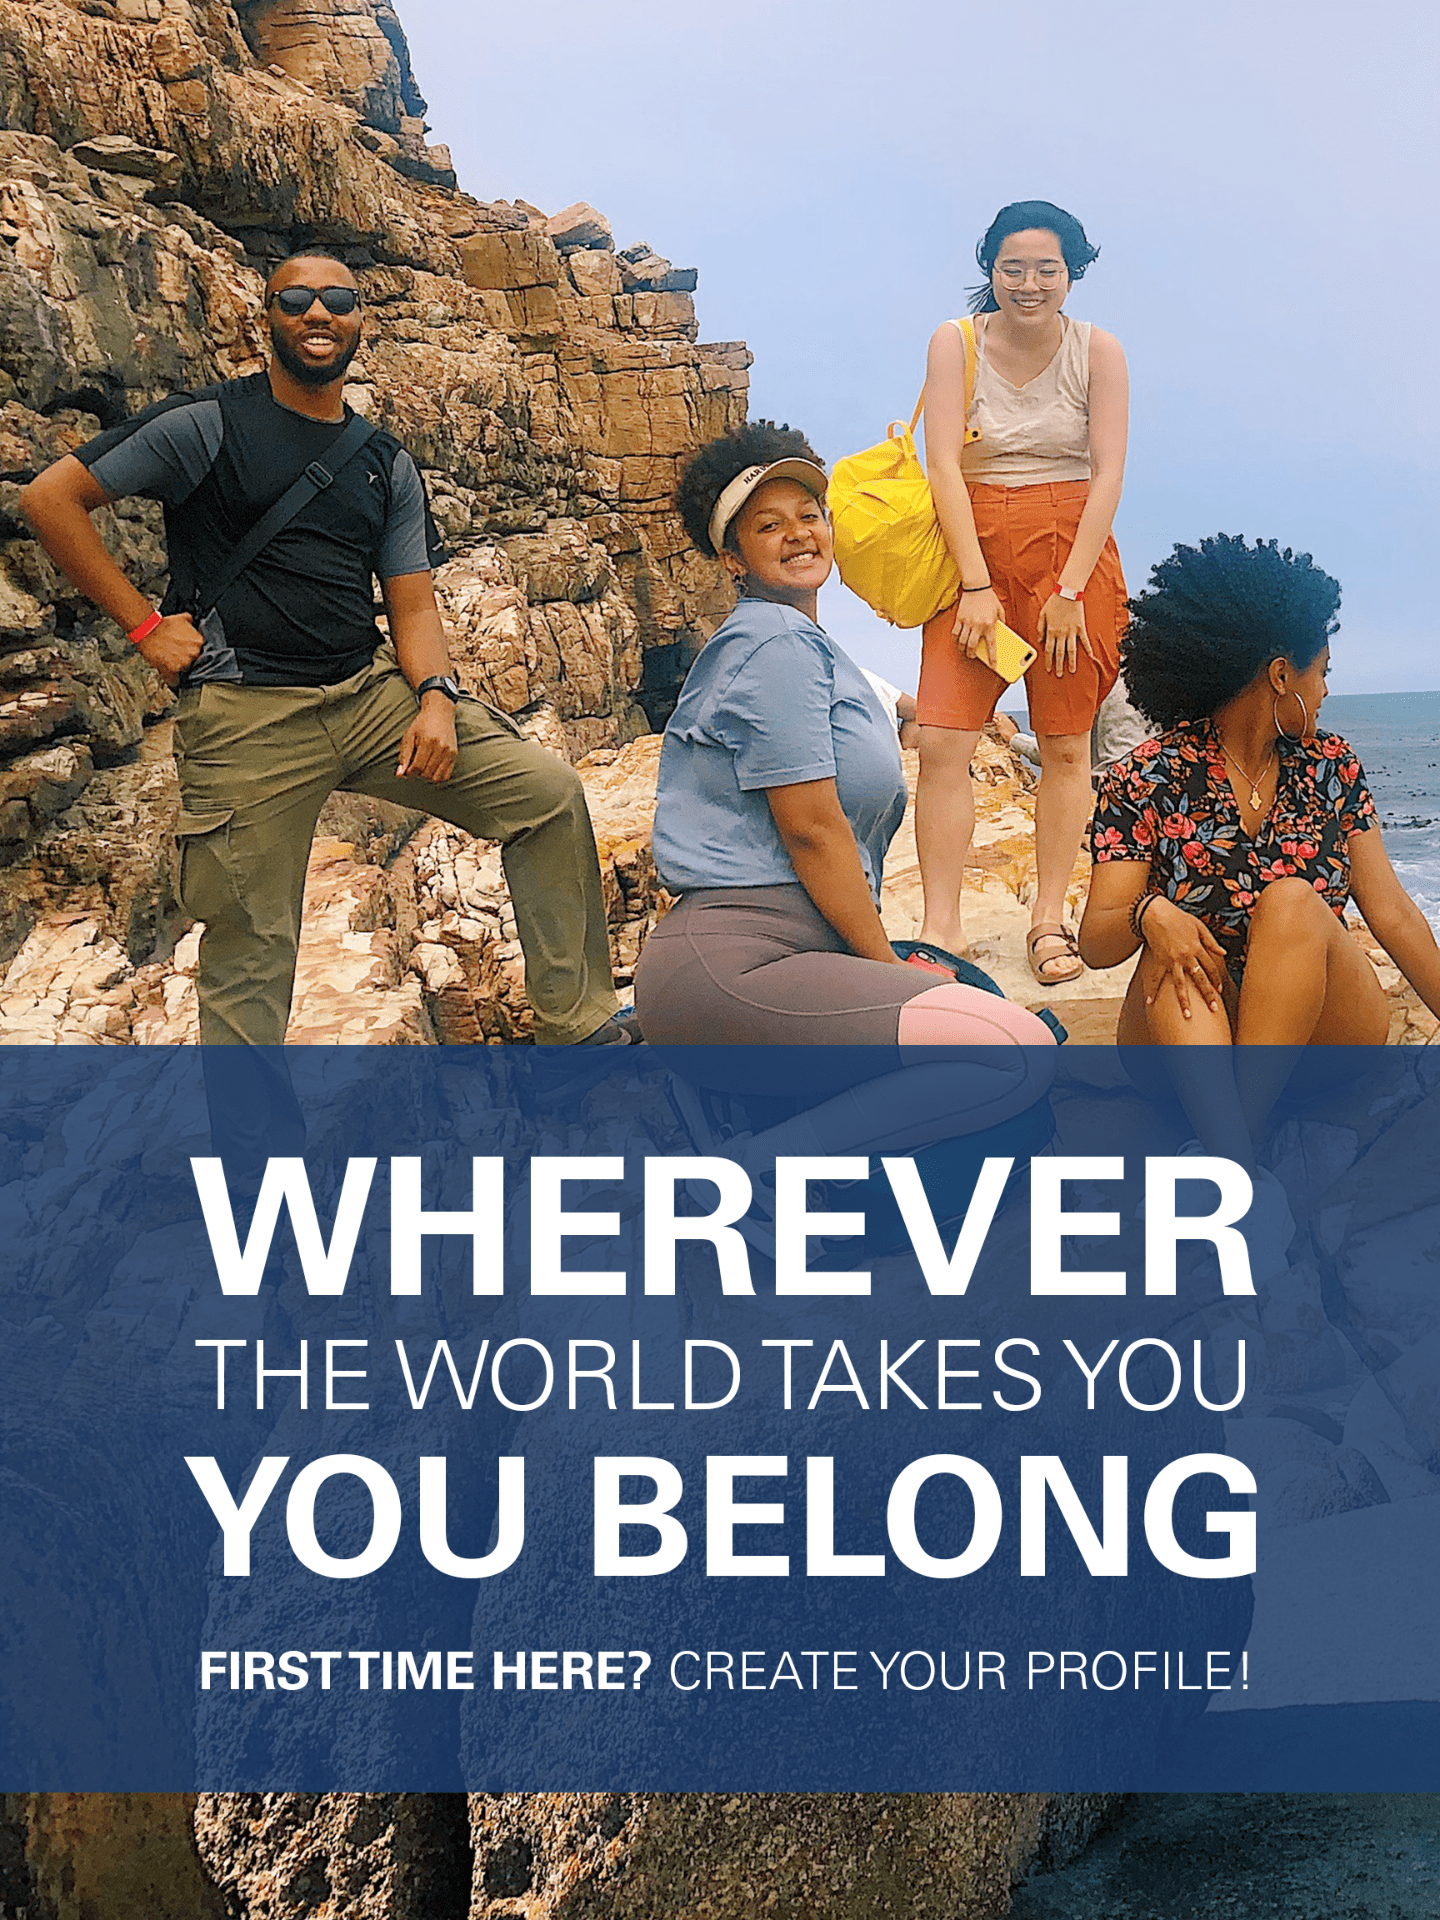 Wherever the world takes you, you belong. First time here? Create your profile.